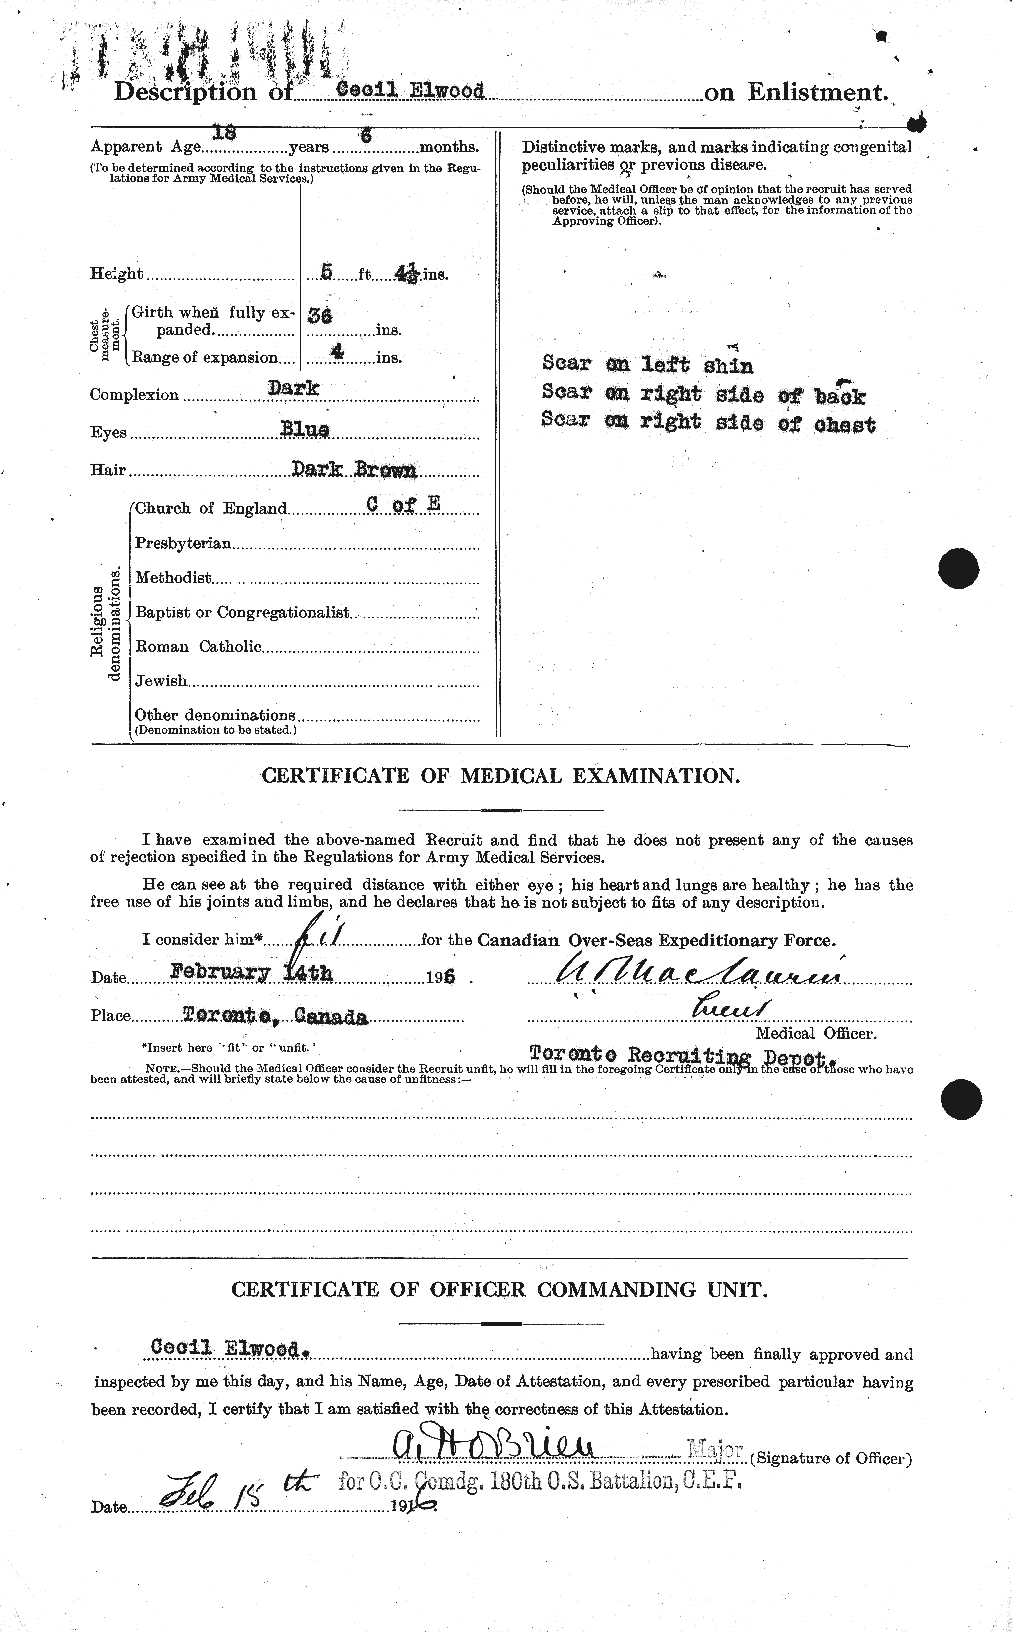 Personnel Records of the First World War - CEF 315003b